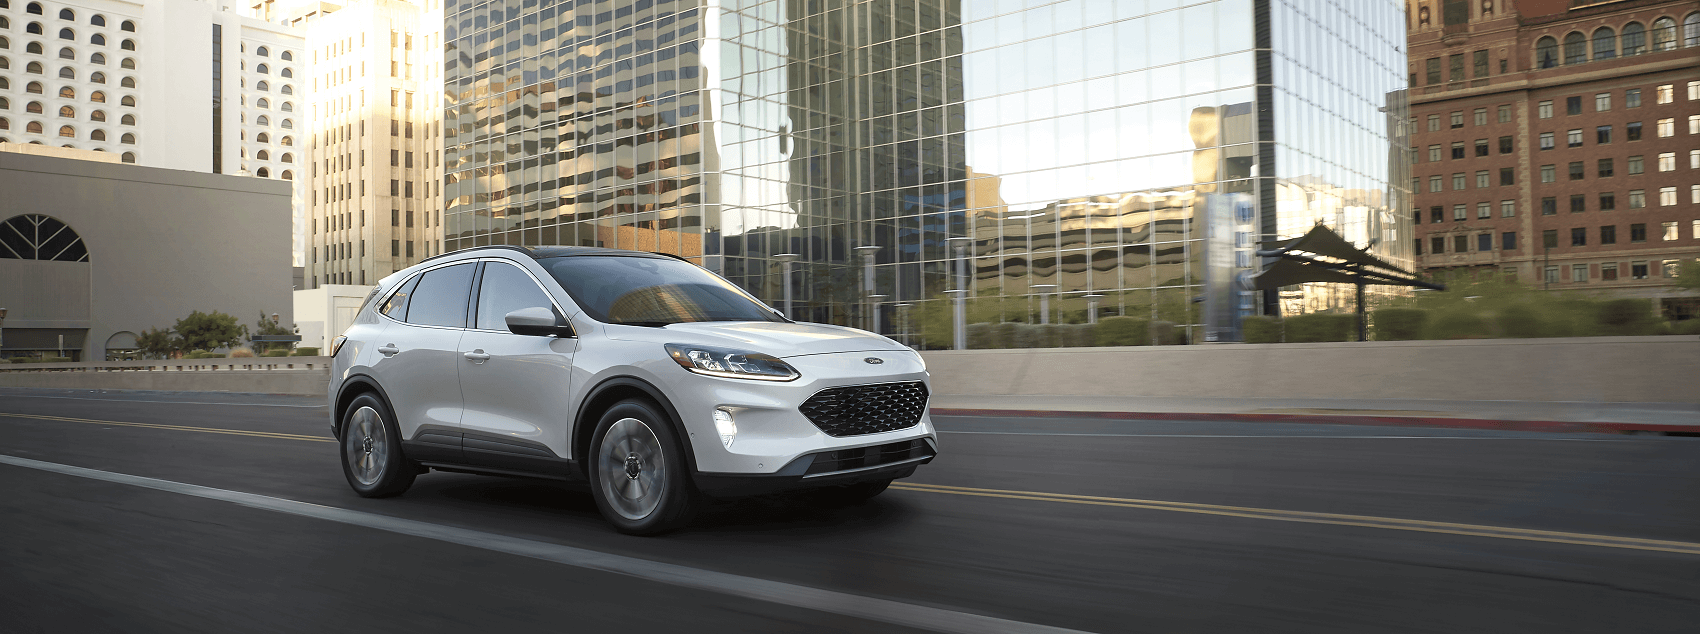 2021 Ford Escape Reviews Waldorf MD
